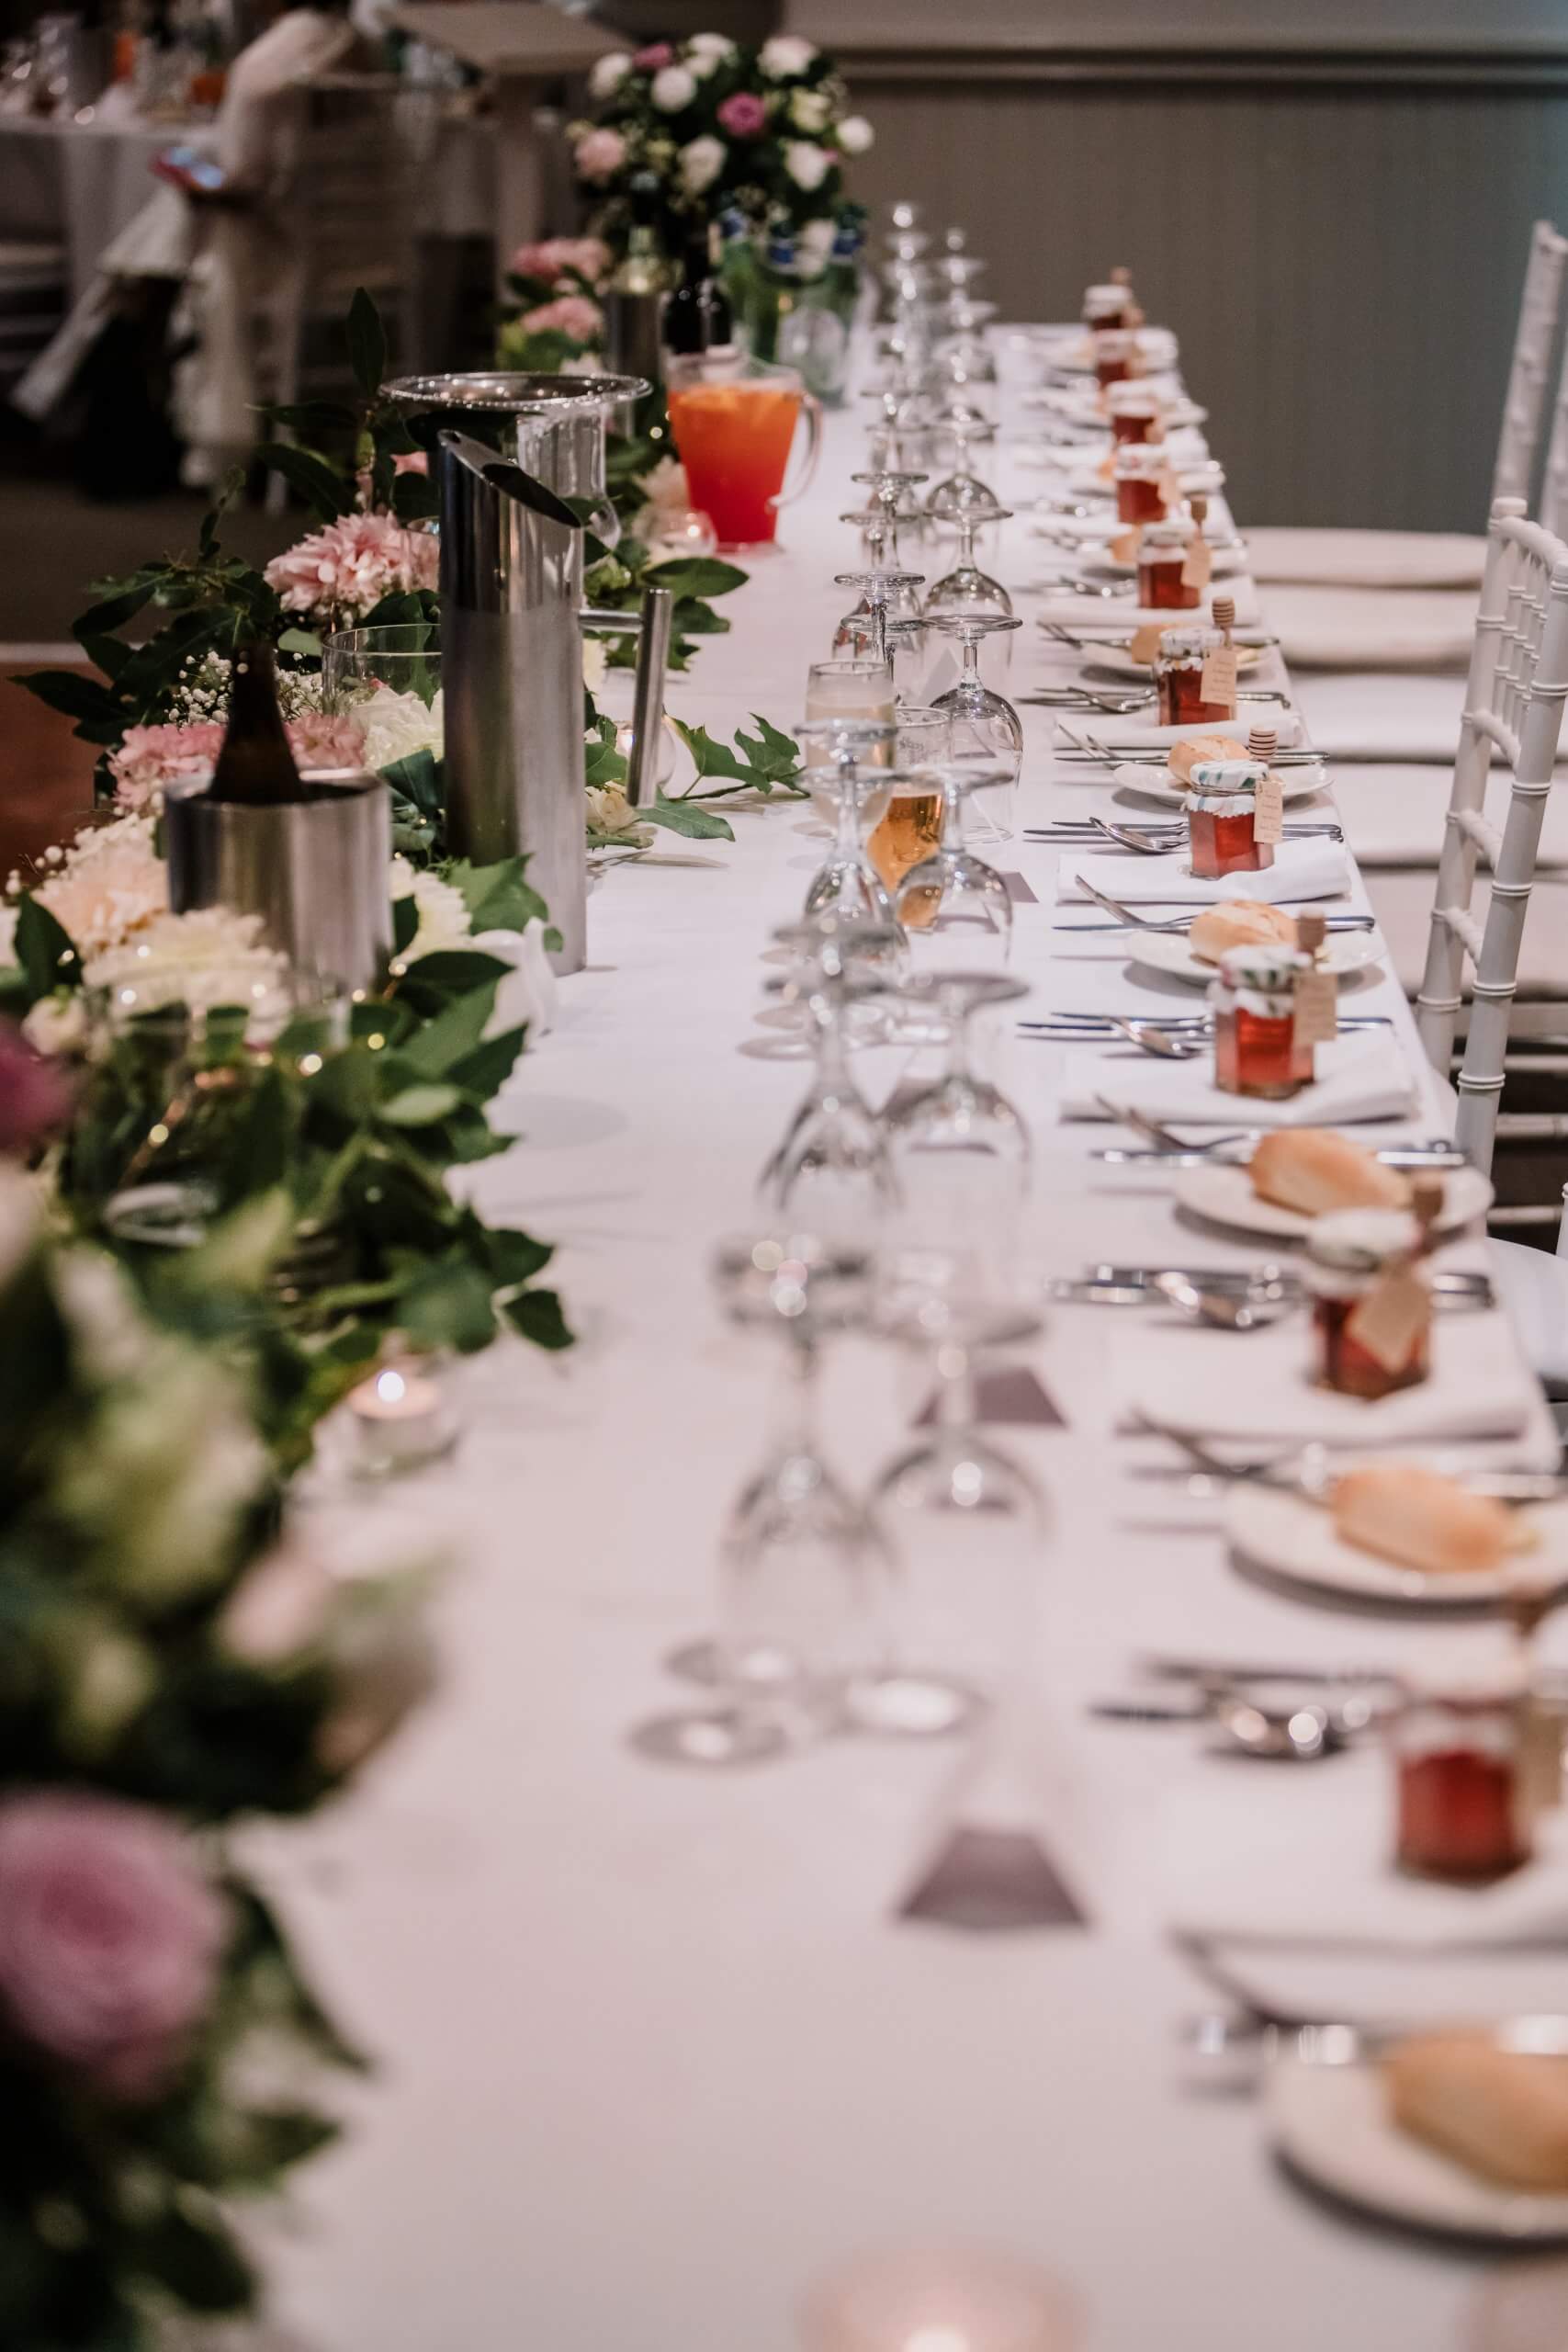 Long bridal table lined with flowers.